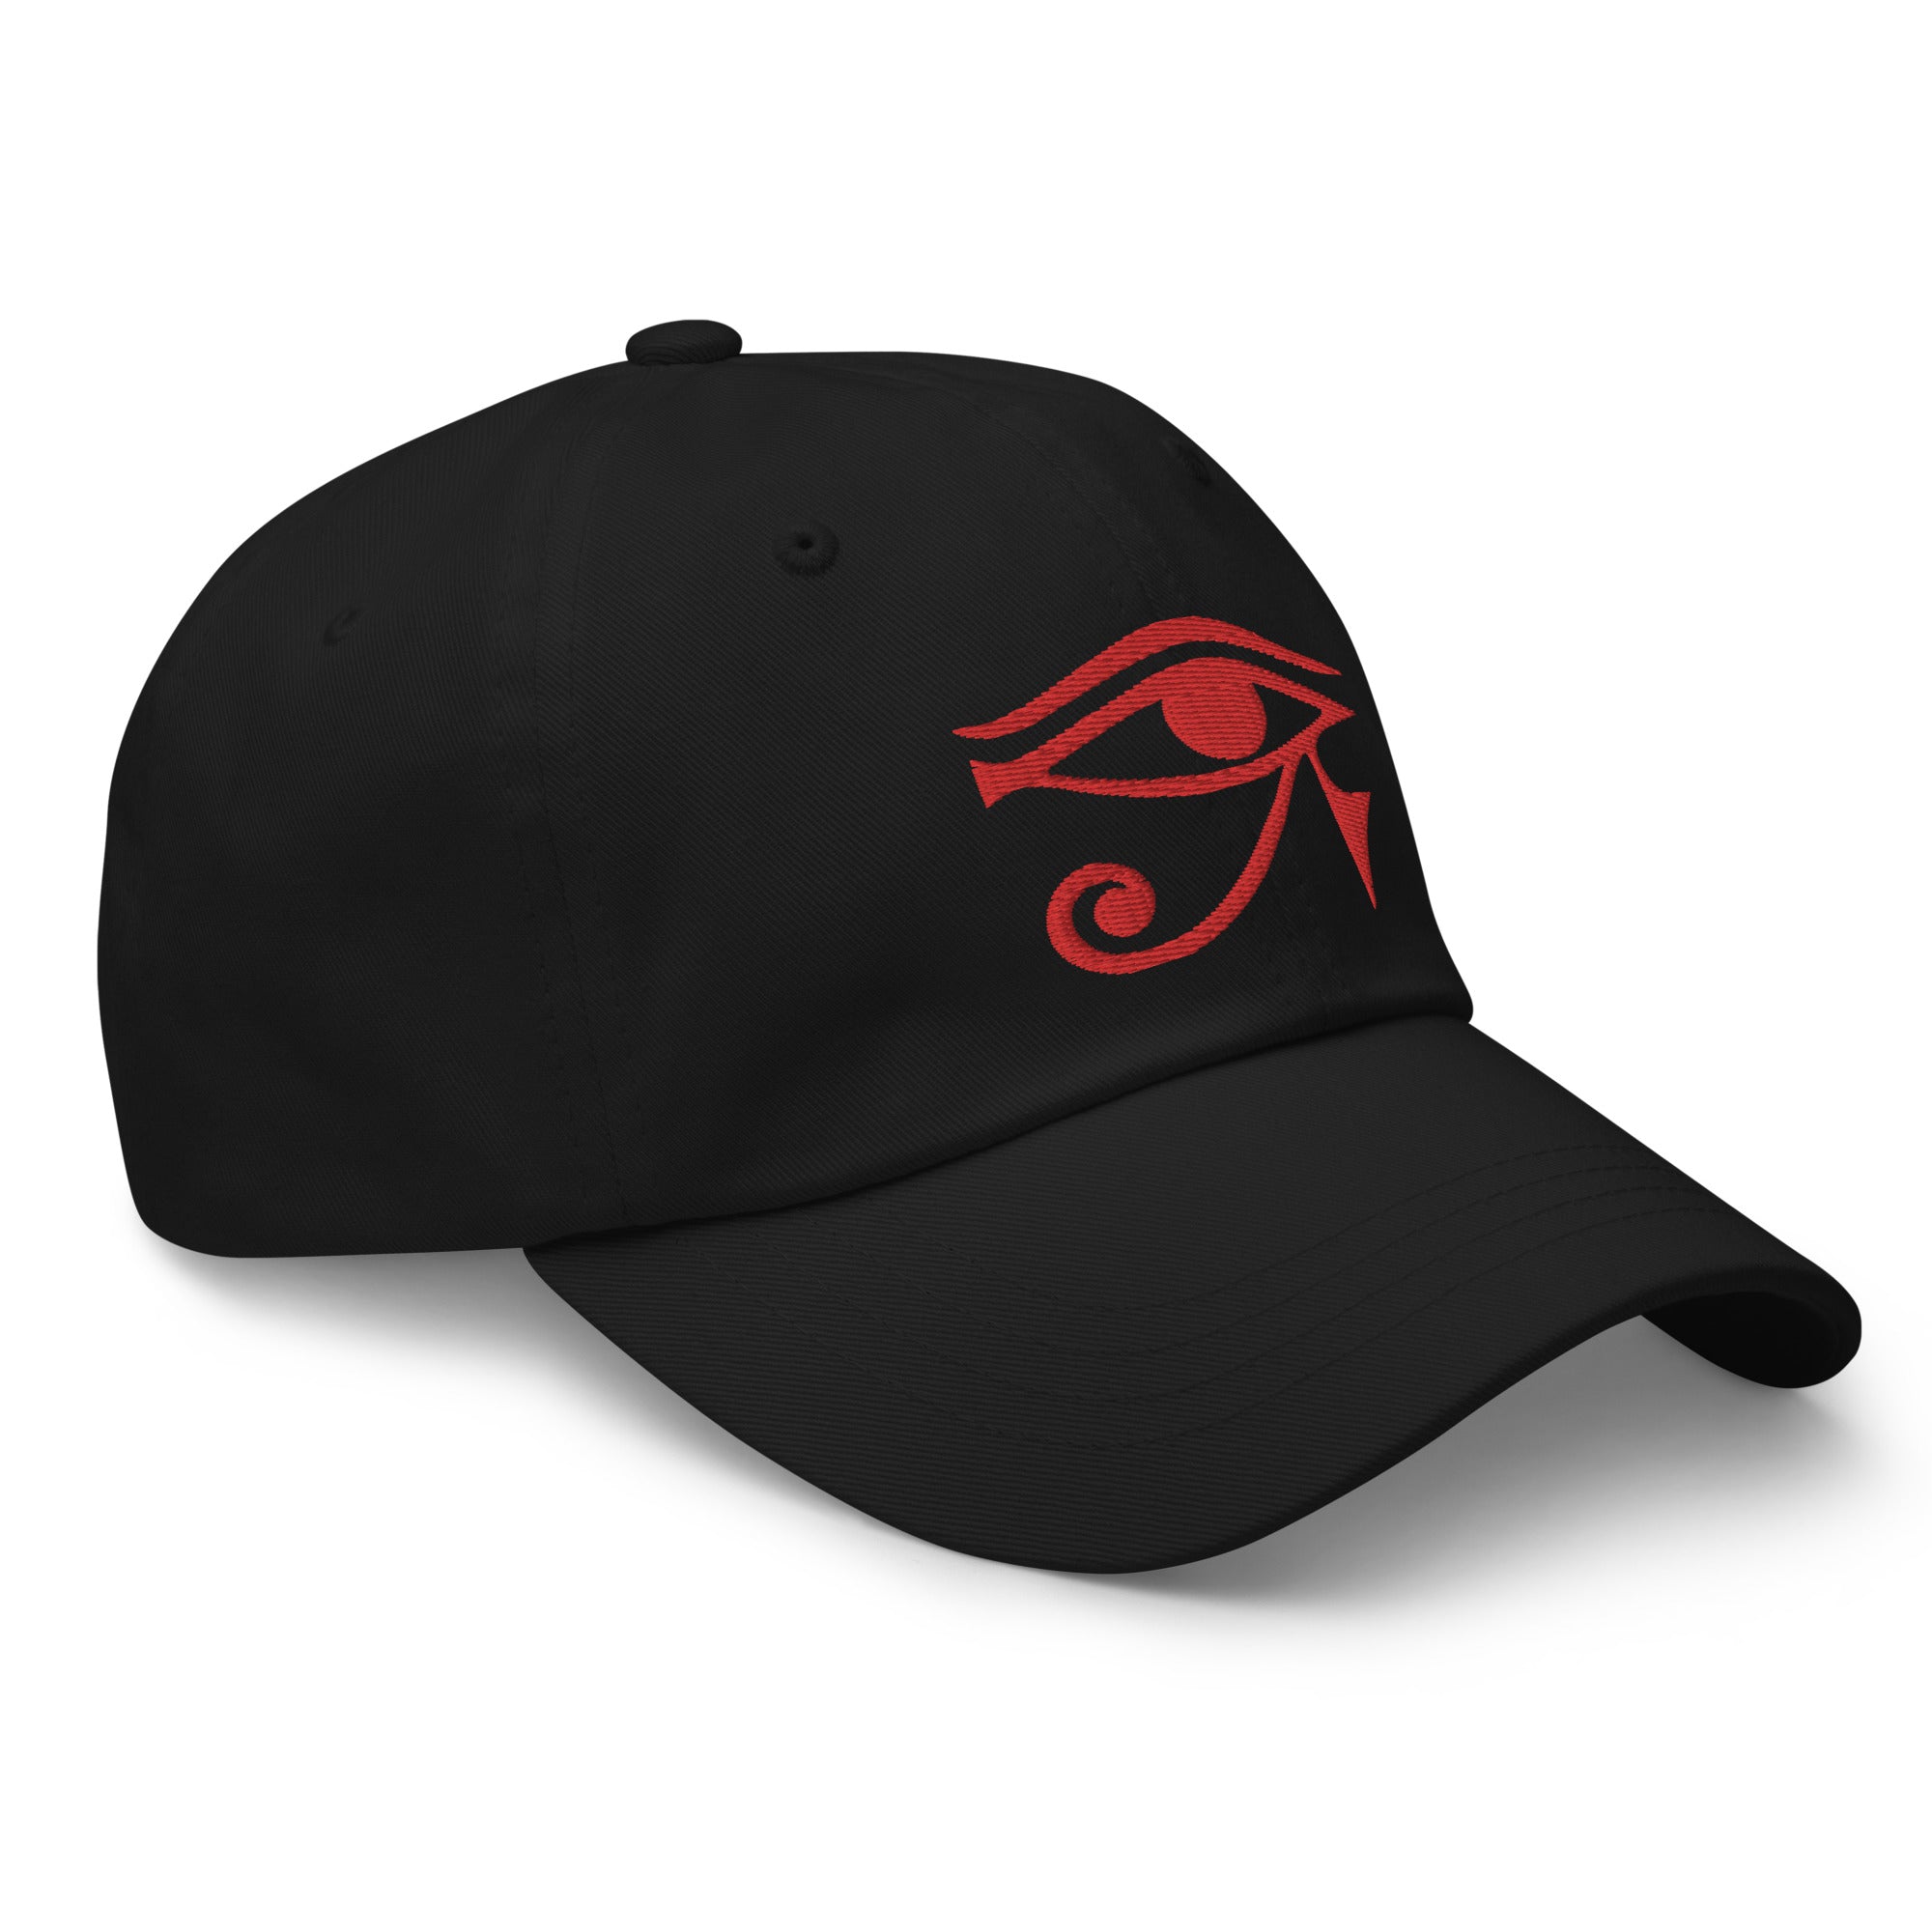 Eye of Ra Egyptian Goddess Embroidered Baseball Cap Red Thread Dad hat - Edge of Life Designs